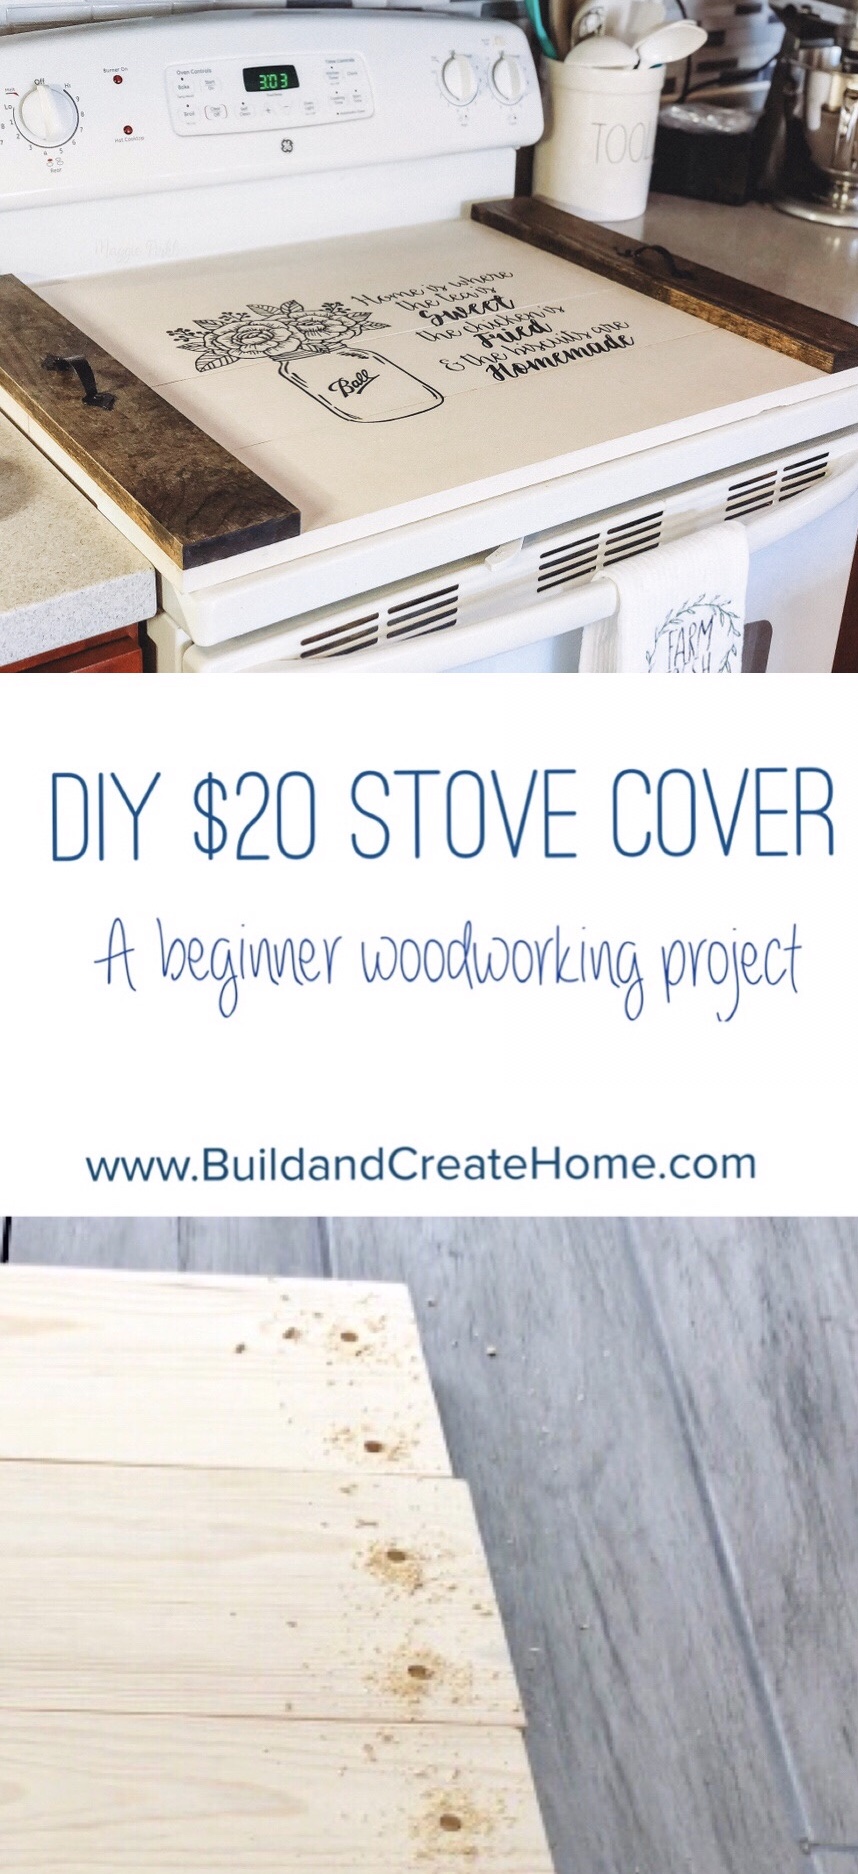 Diy Stove Cover Noodle Board, Diy Wooden Stove Top Cover Plans